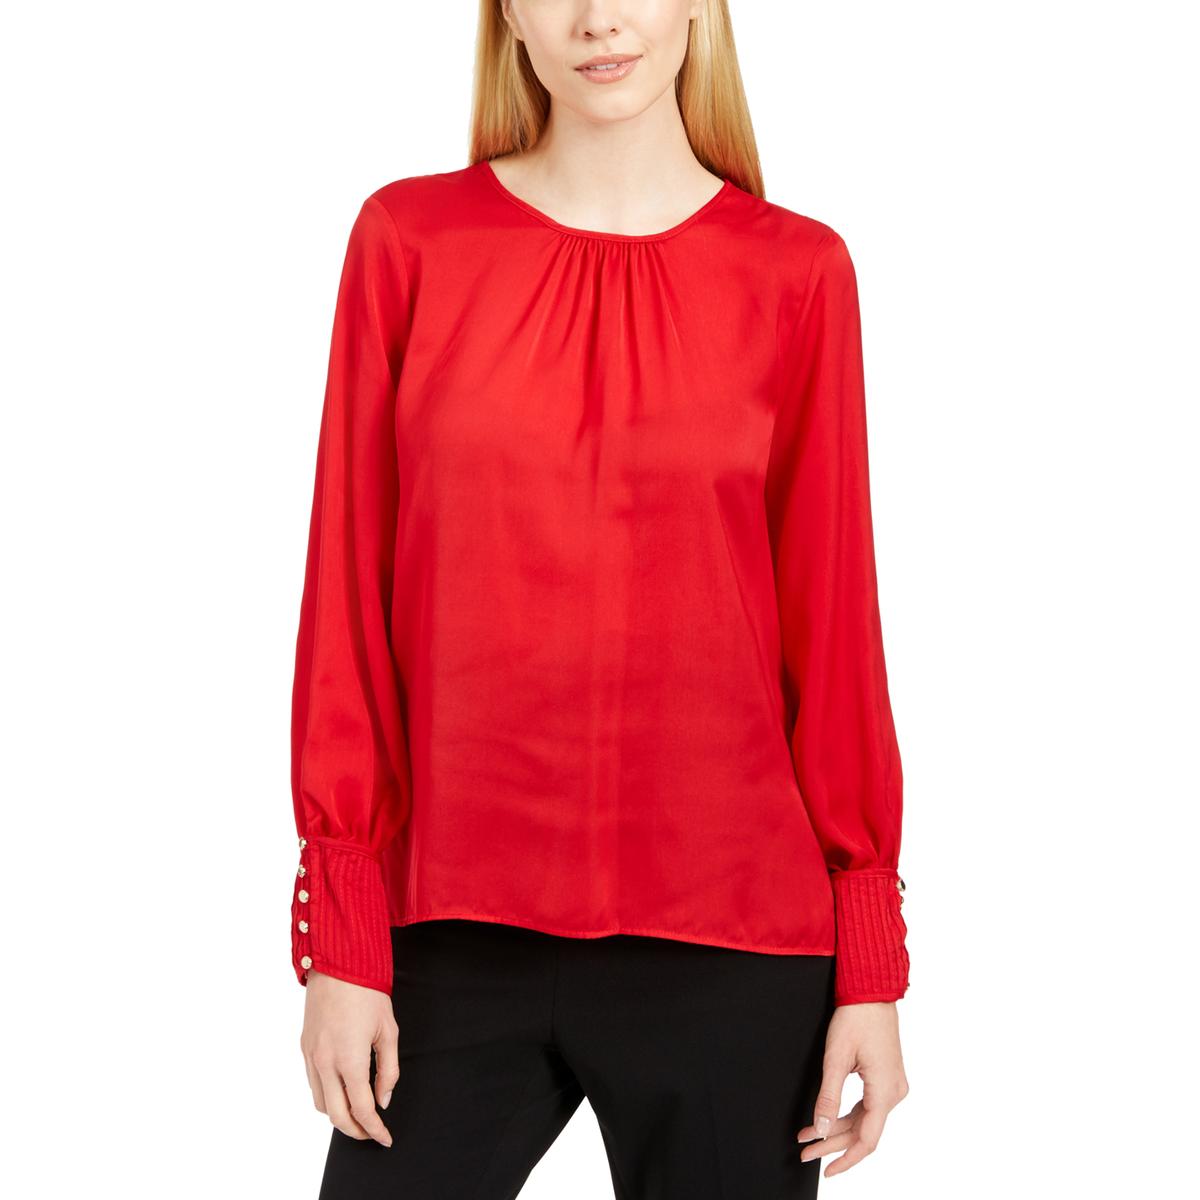 Calvin Klein Womens Red Solid Gathered b Top Shirt Petites PM BHFO 4856 ...